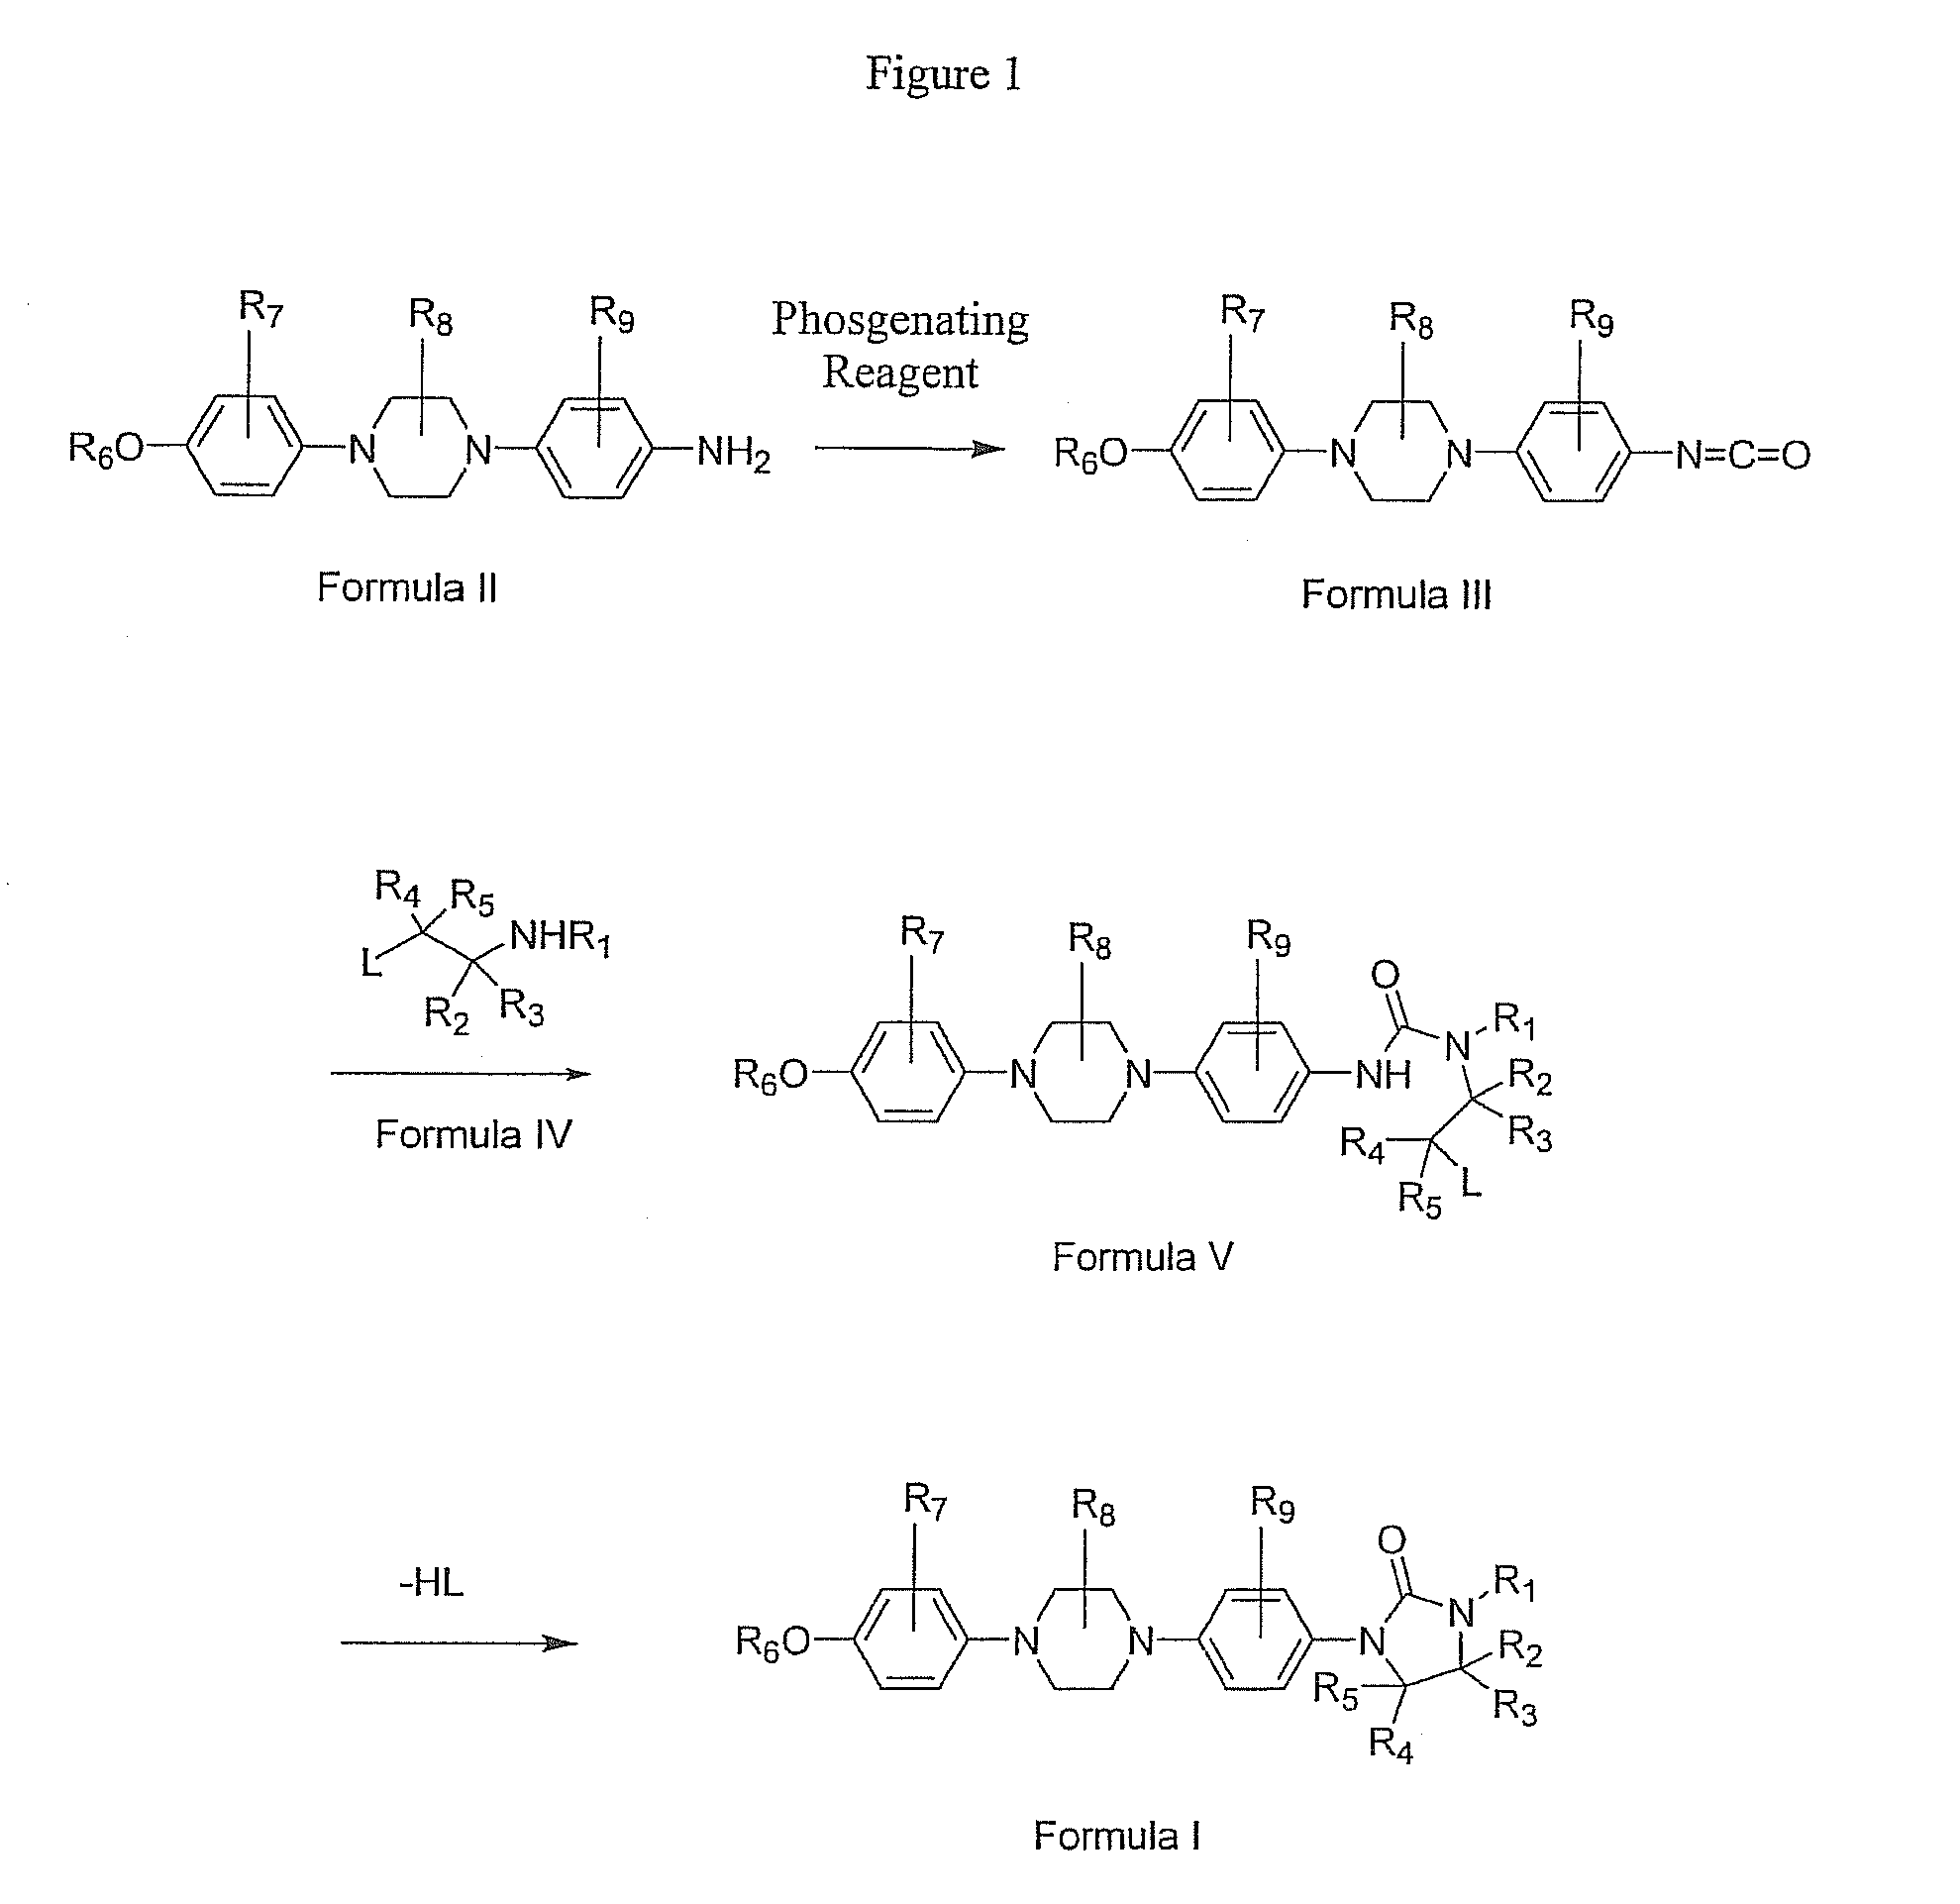 Method for manufacture of 2-oxoimidazolidines